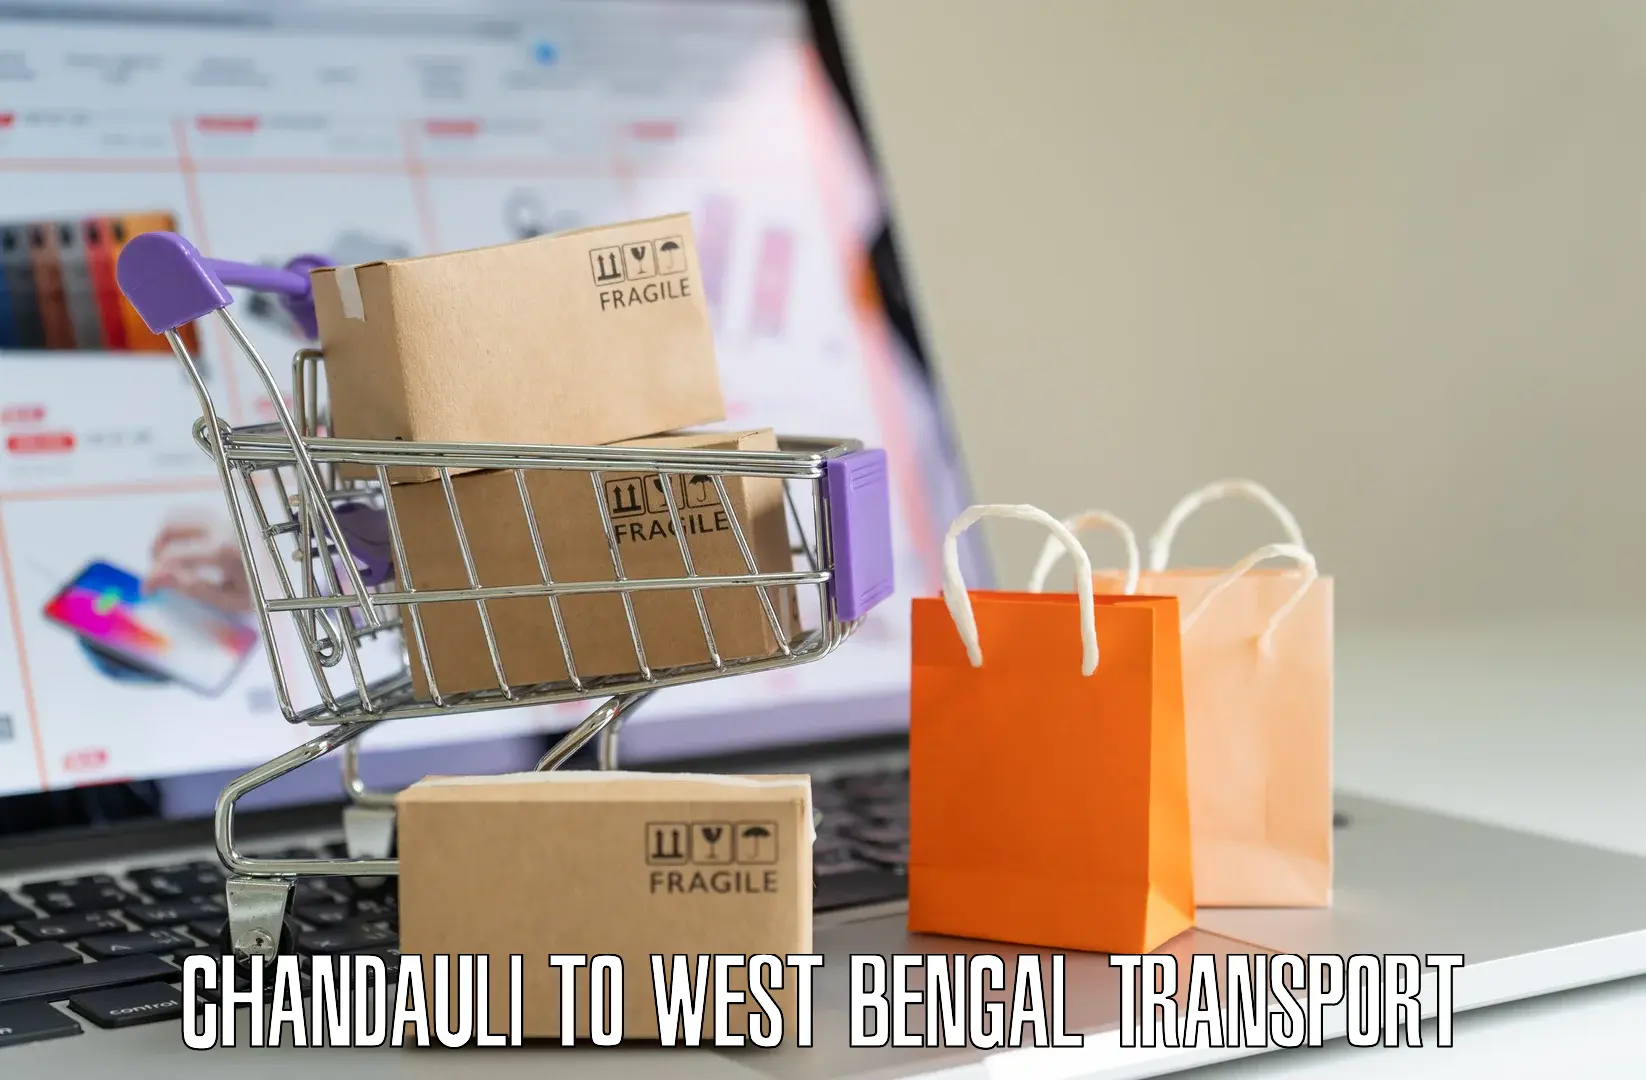 Truck transport companies in India Chandauli to West Bengal